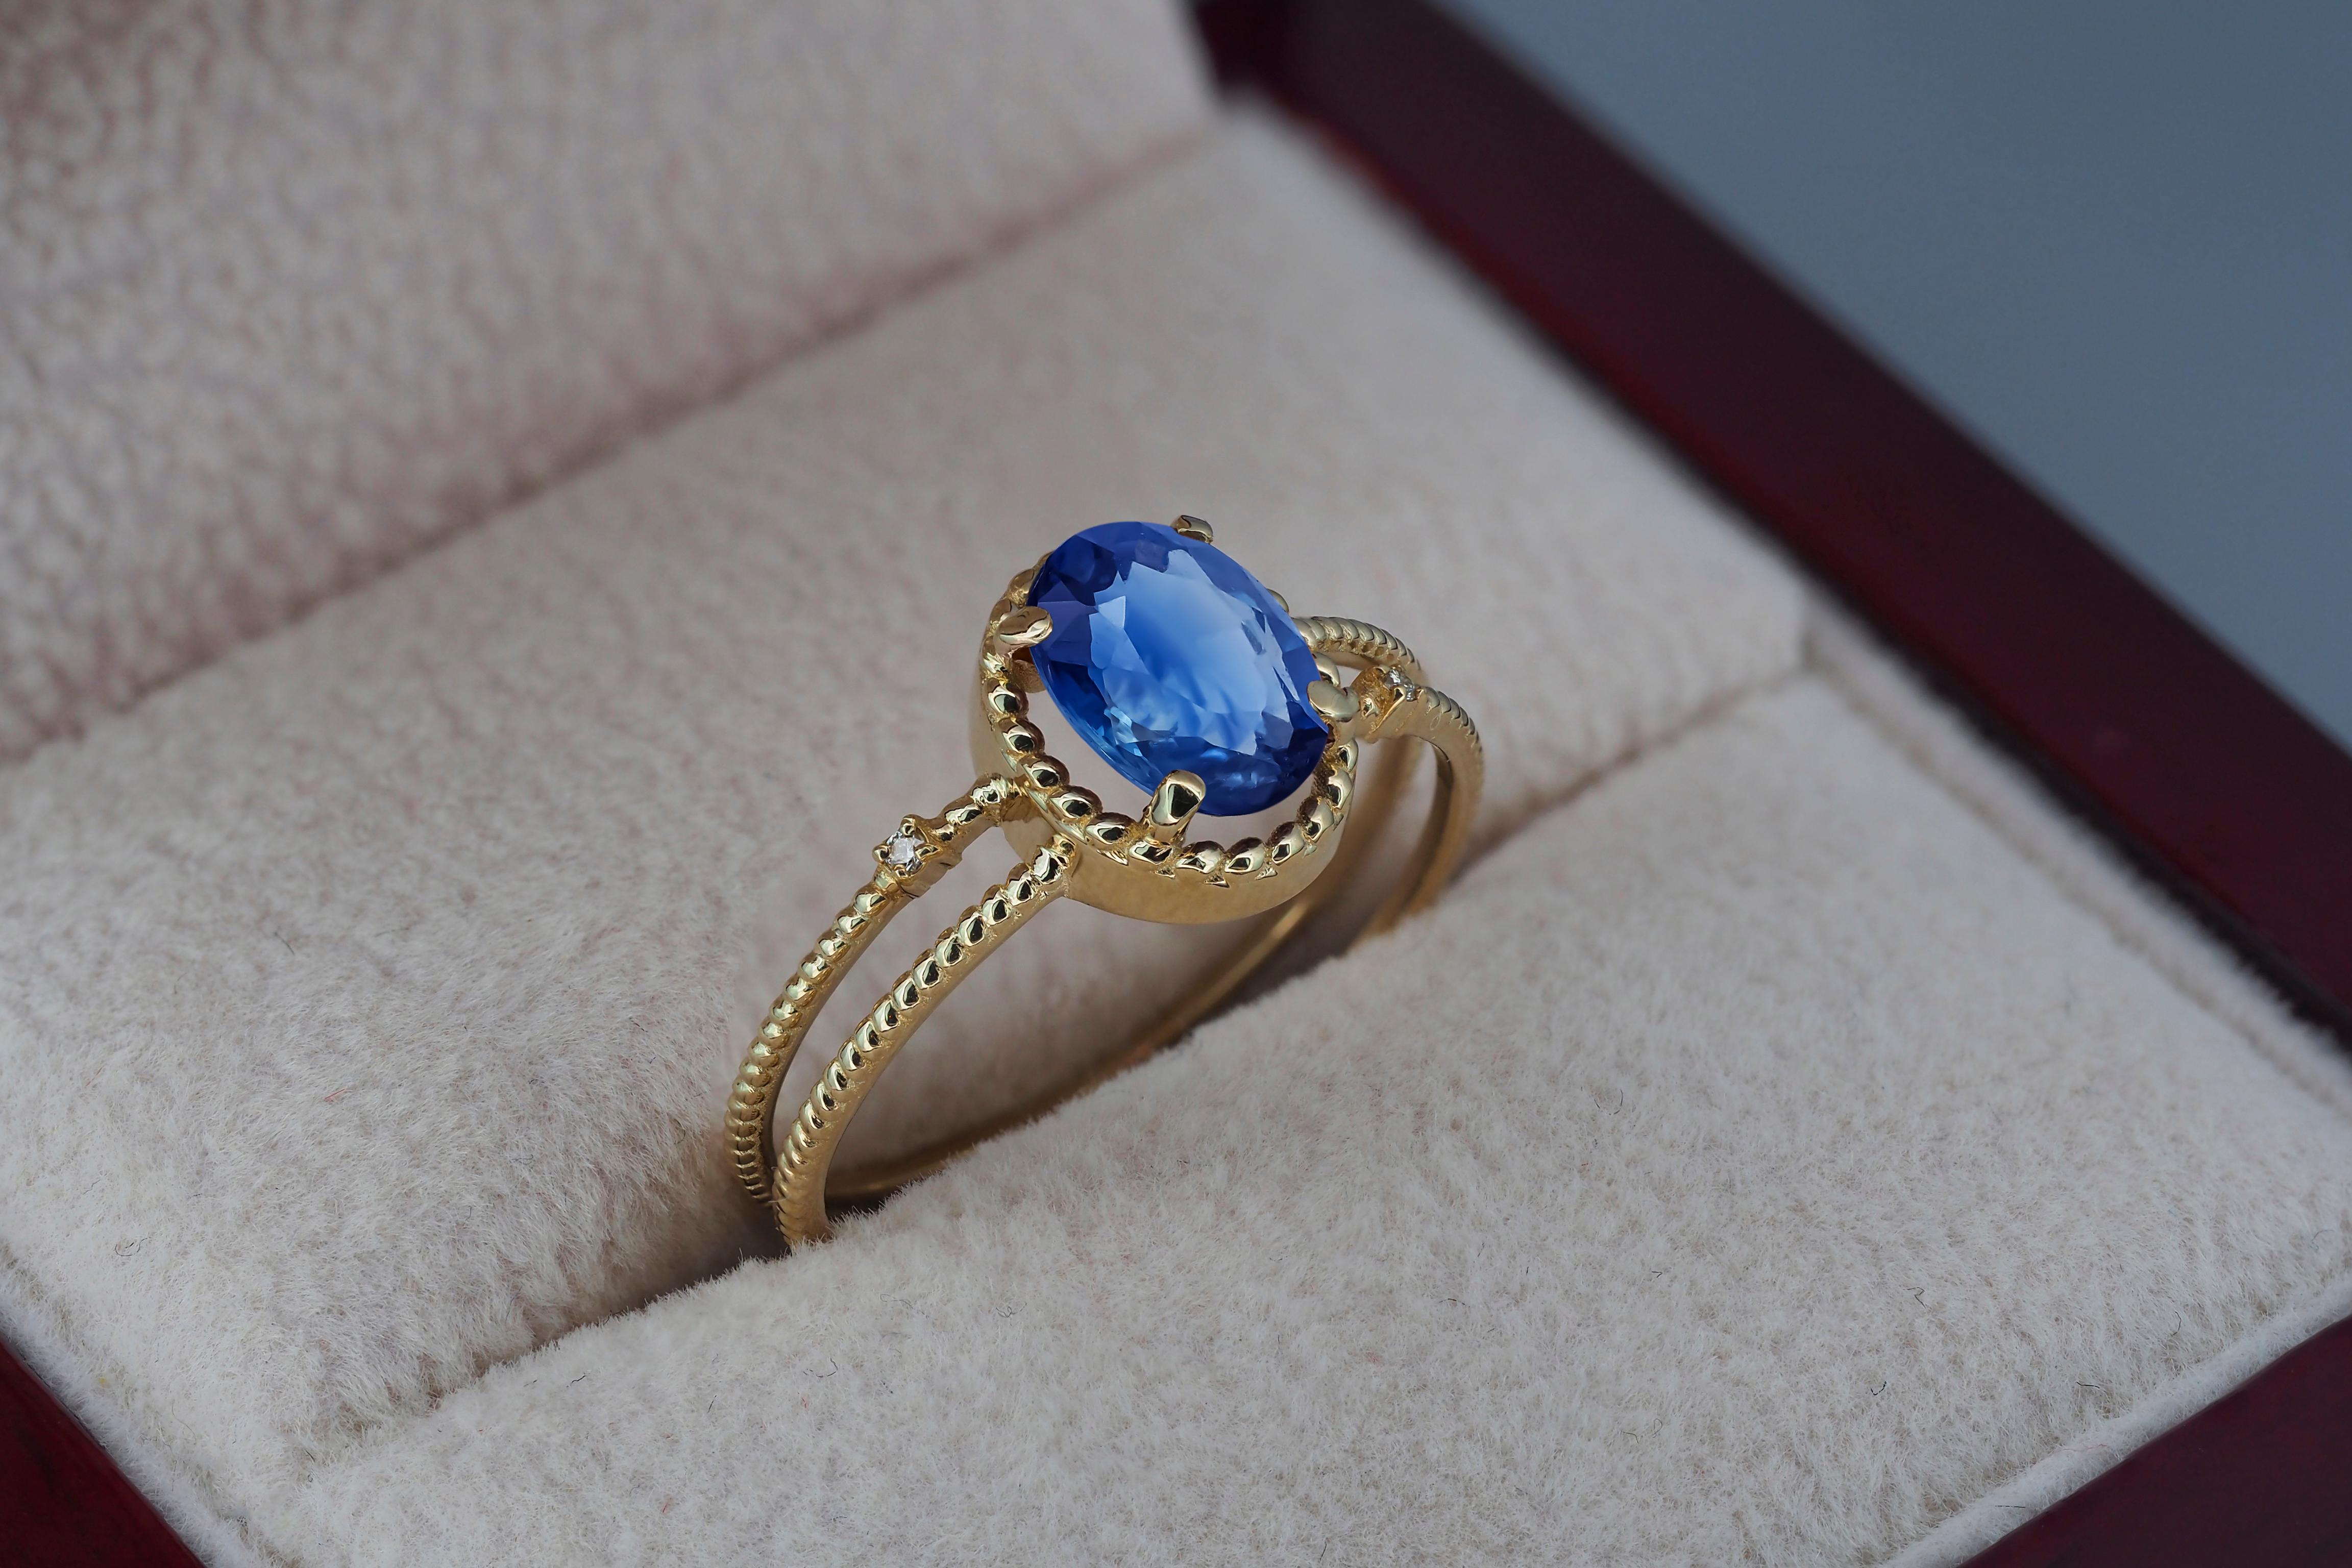 For Sale:  Sapphire Gold Ring, Oval Sapphire Ring, 14k Gold Ring with Sapphire 6